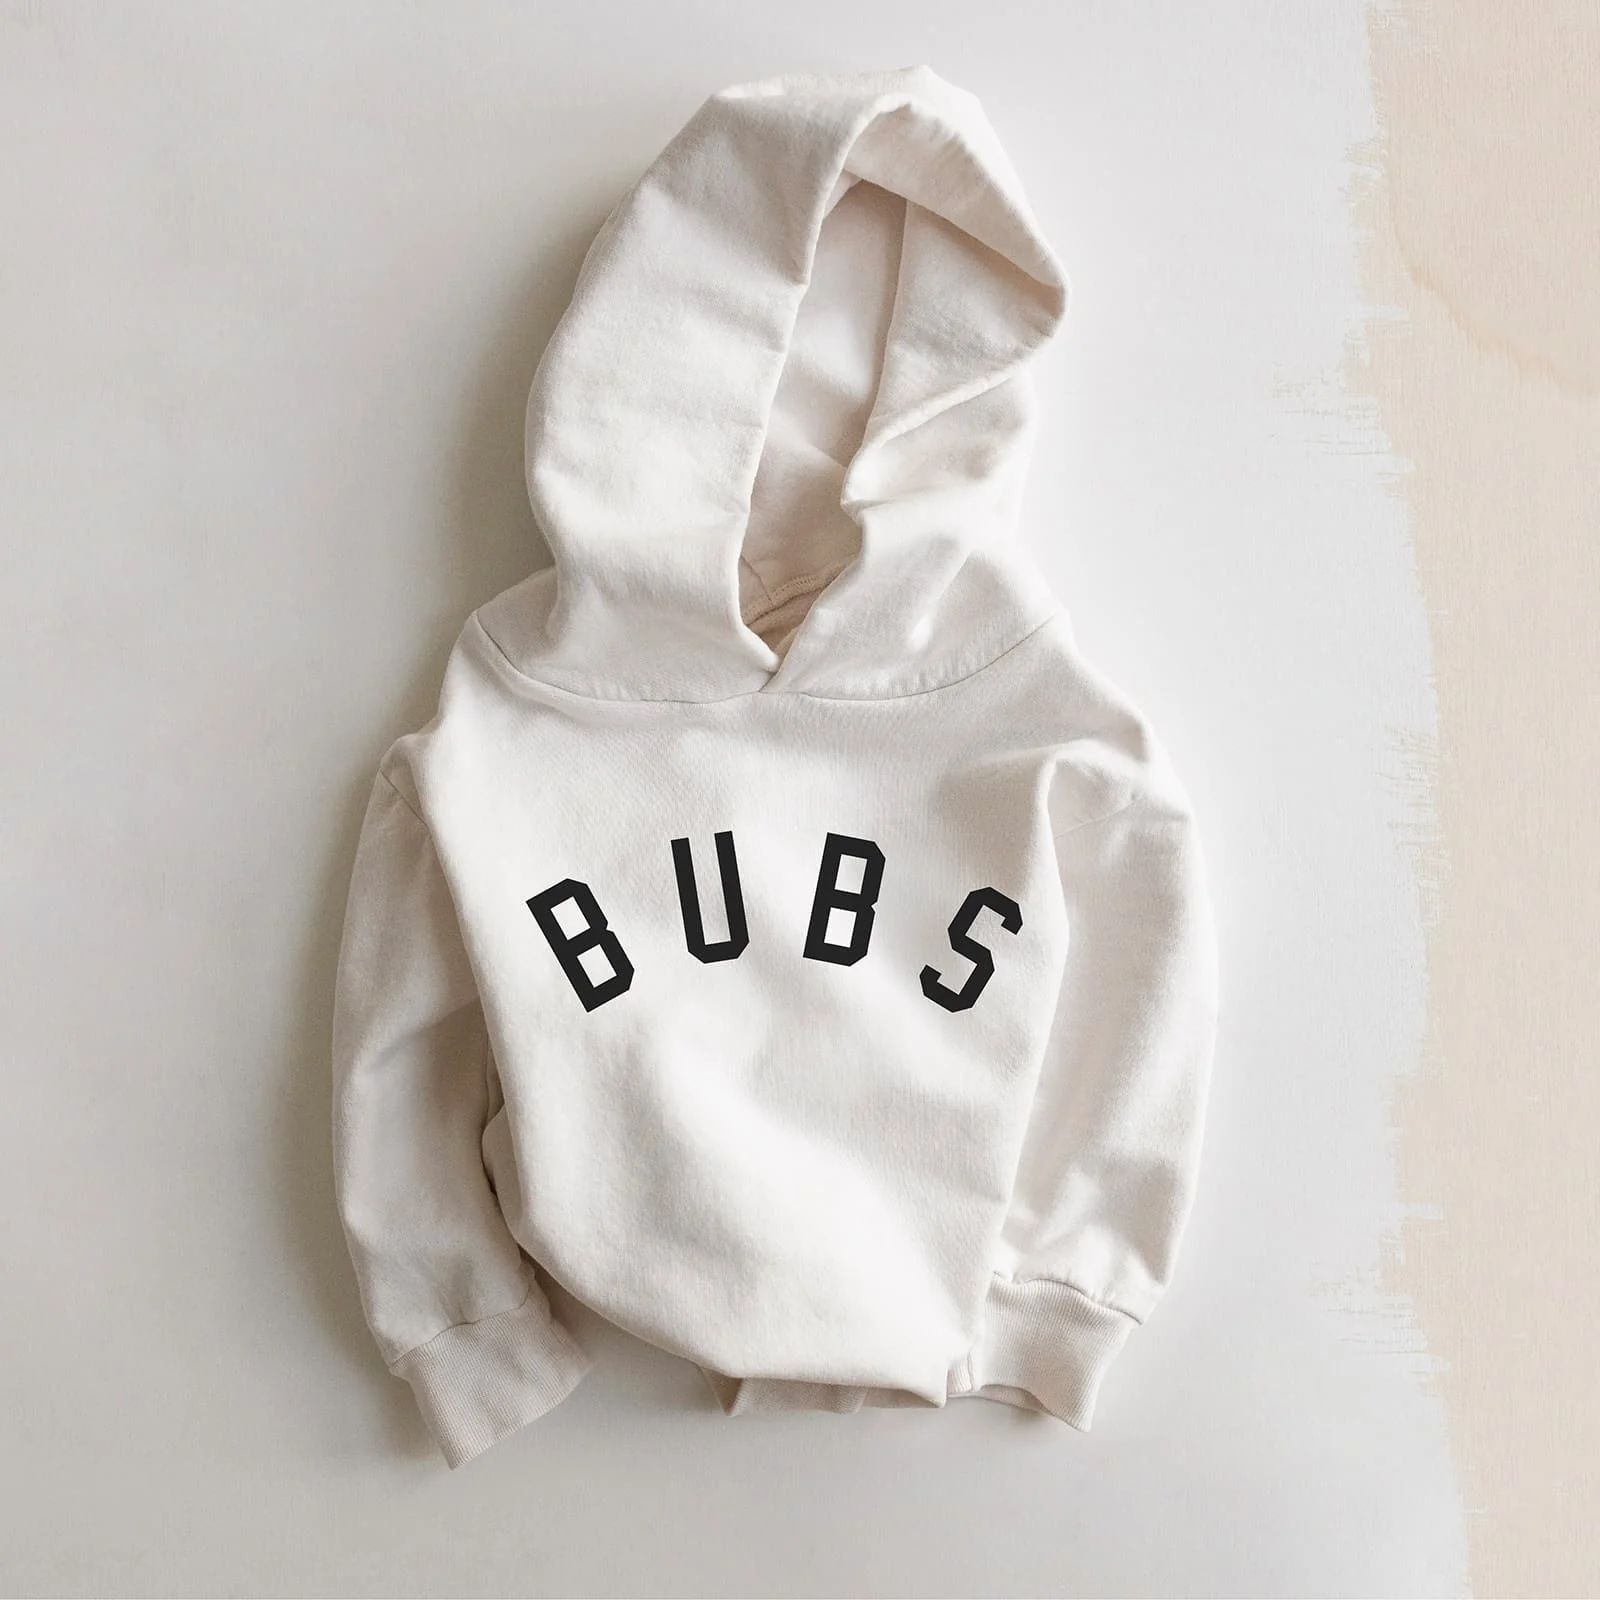 Kids "Bubby™" Everyday Boys Hoody in Powder Color - Ford And Wyatt | Ford and Wyatt